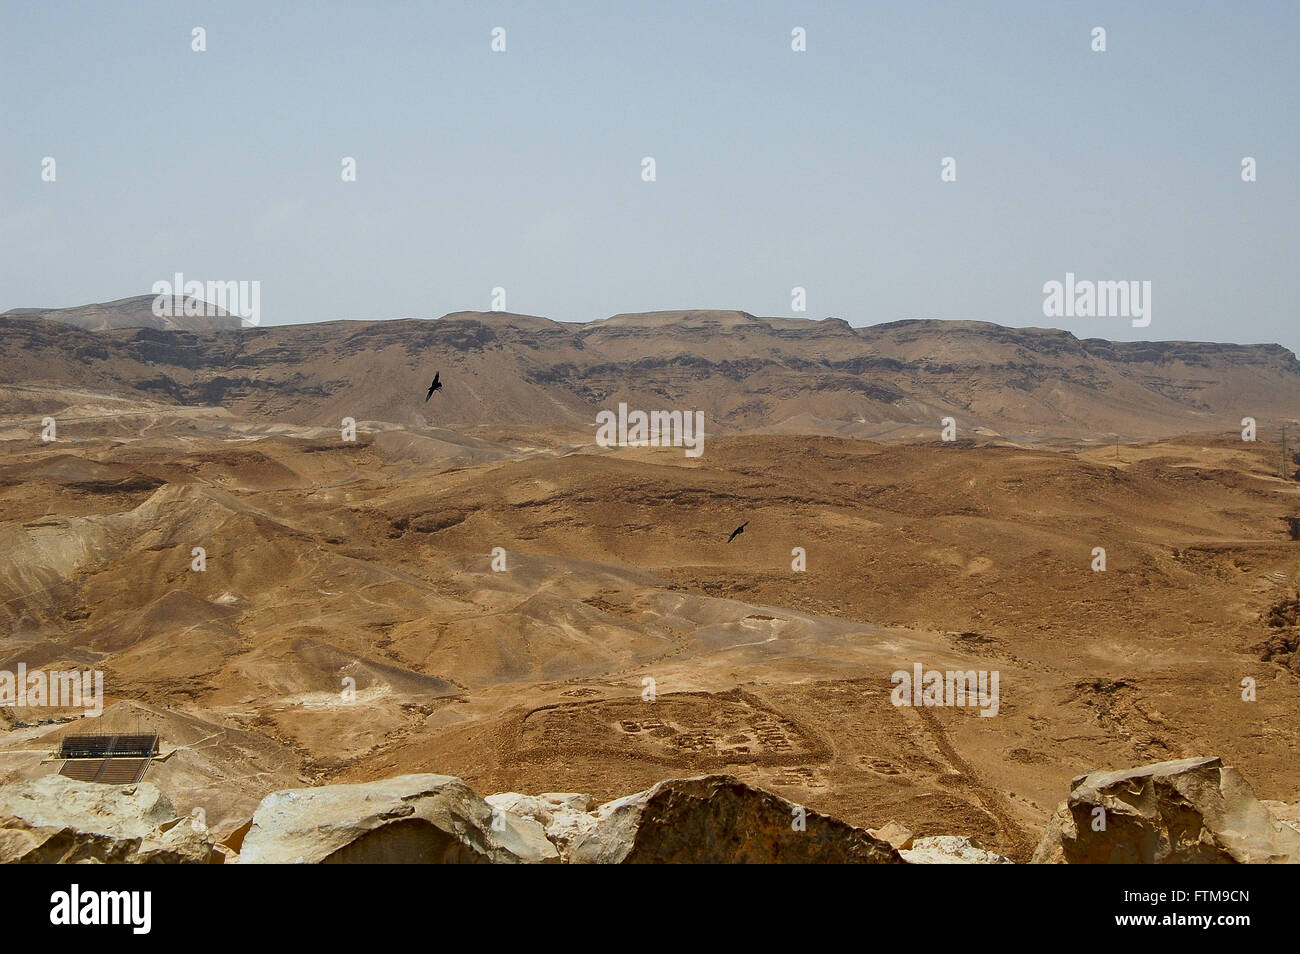 General view of the archaeological site Masada - Judean Desert Stock Photo